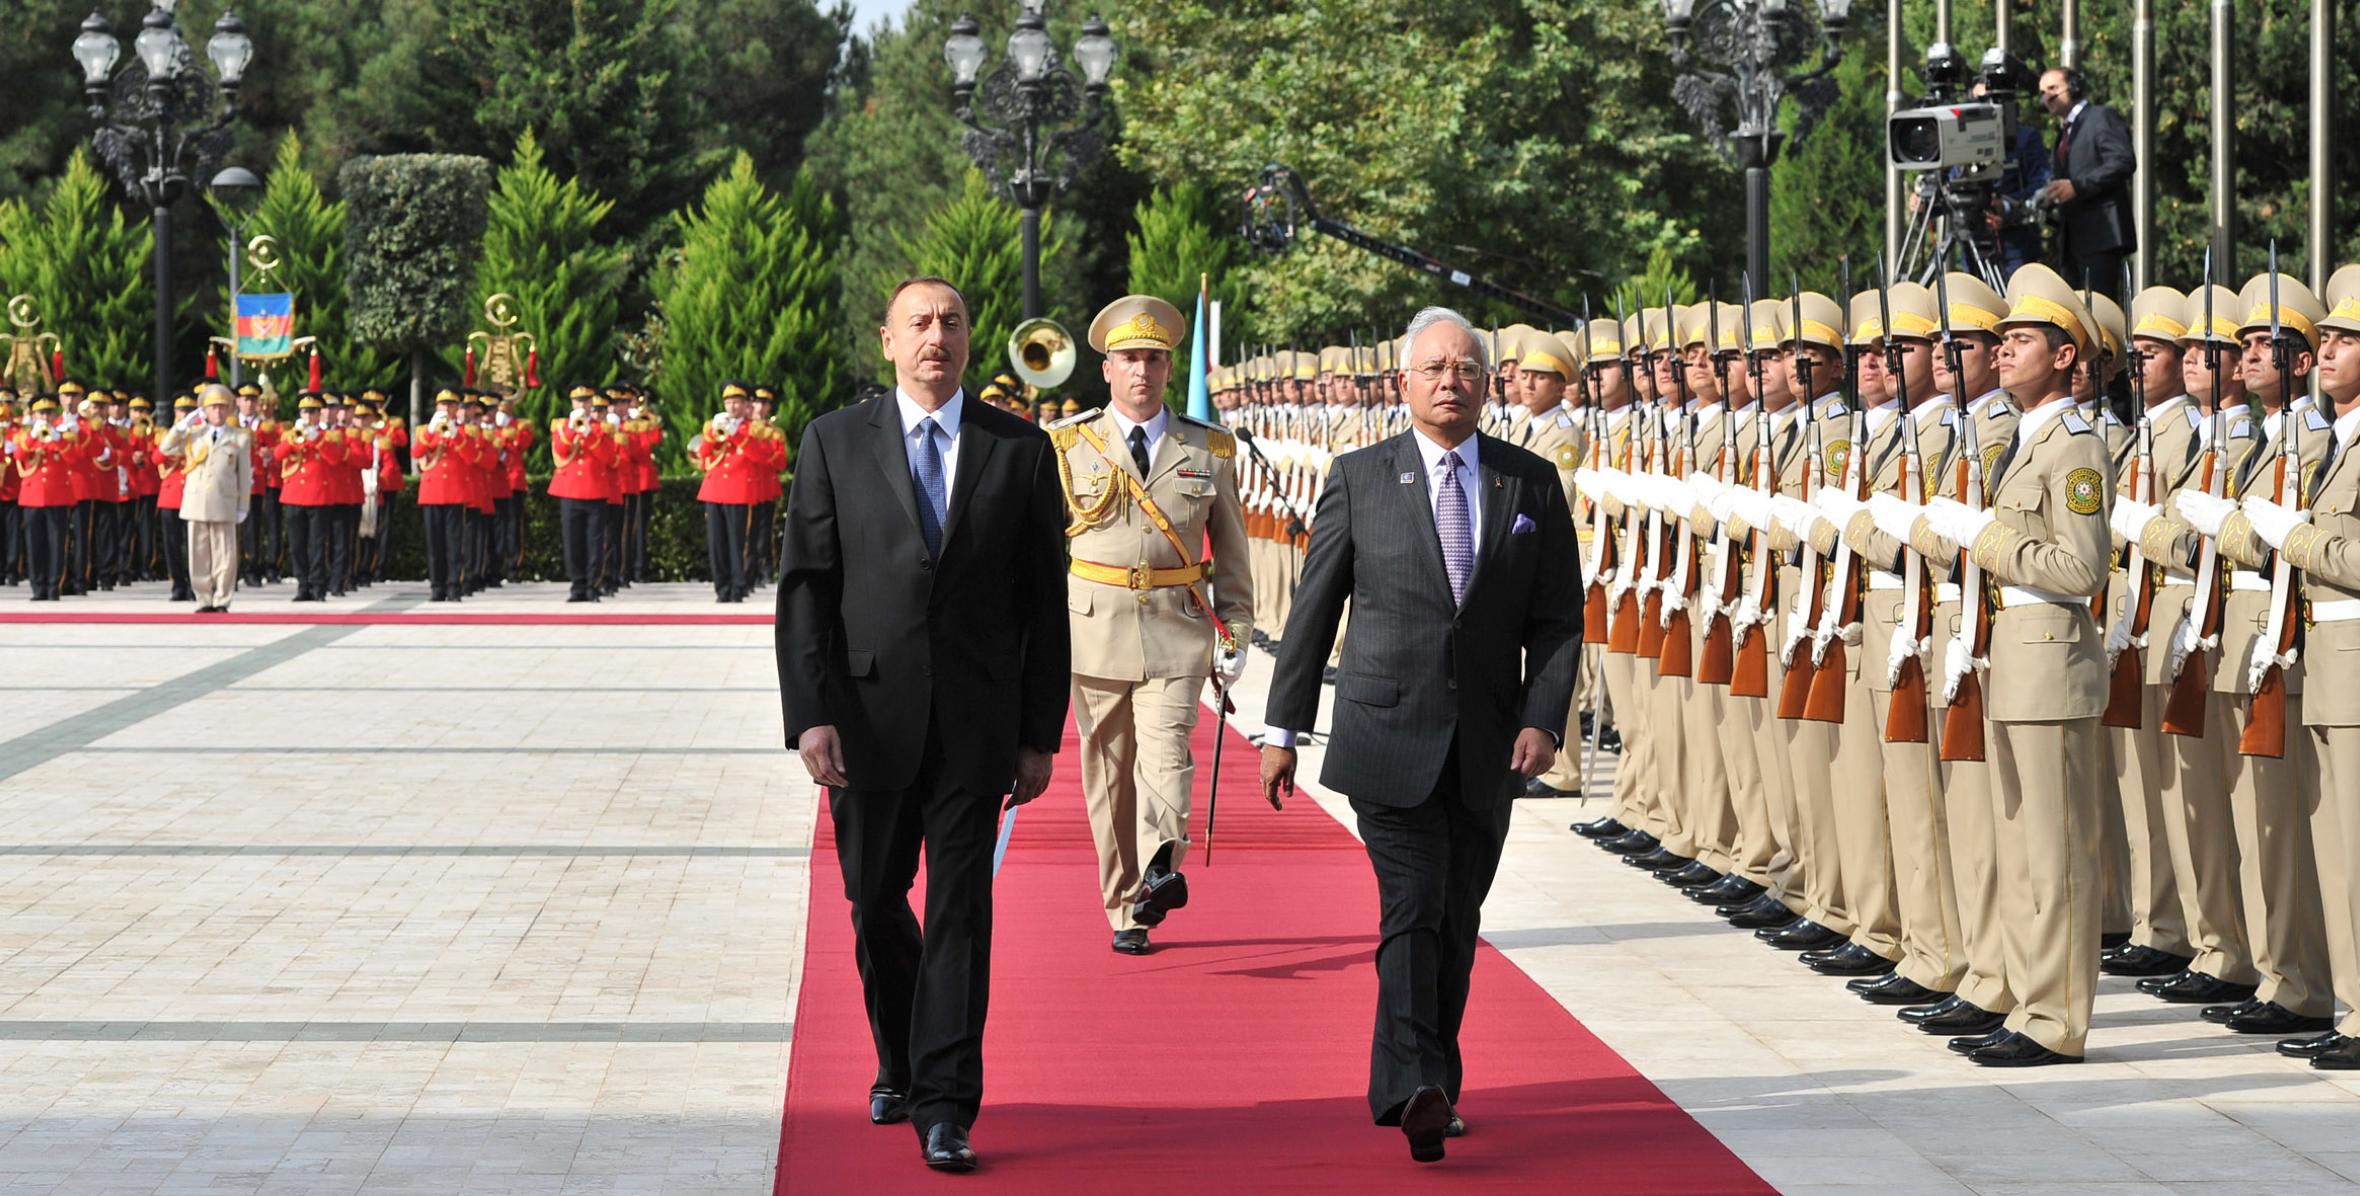 An official welcoming ceremony for Prime Minister of Malaysia Mohammad Najib Tun Abdul Razak was held